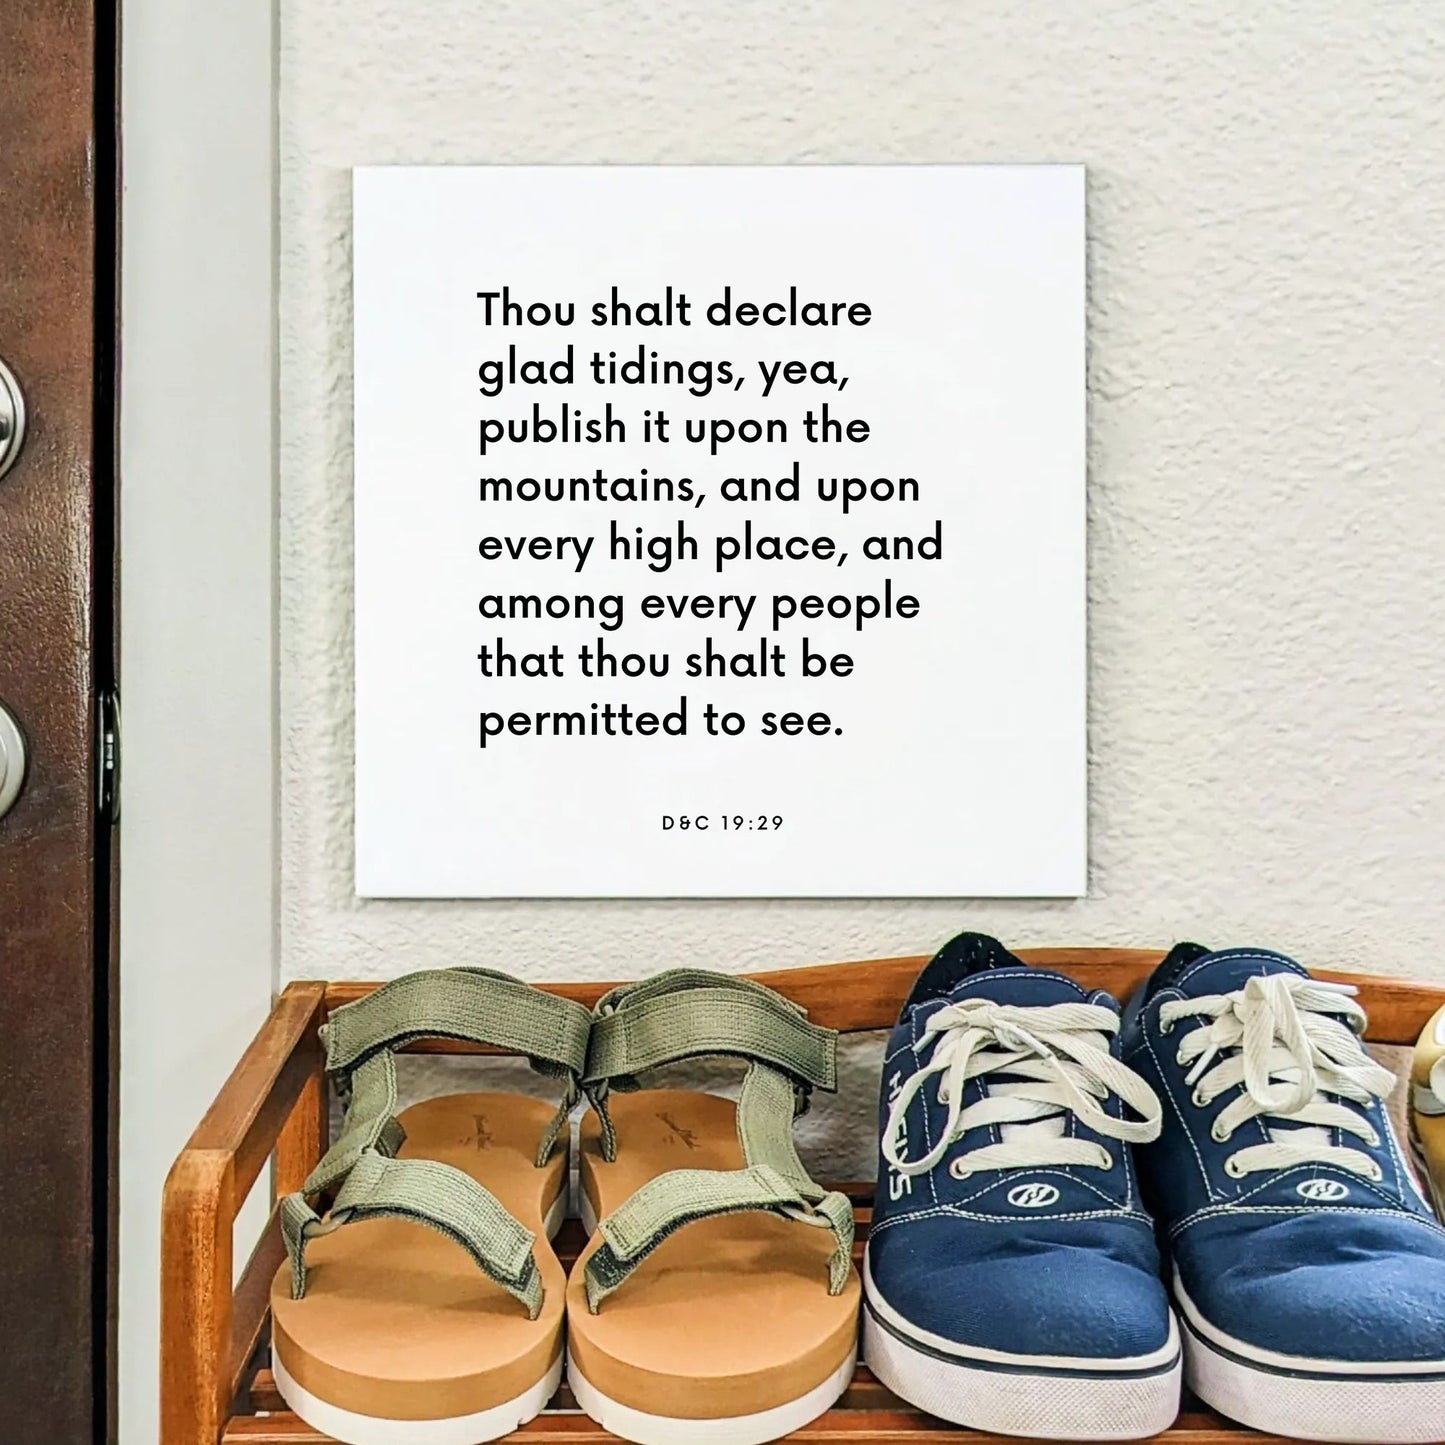 Shoes mouting of the scripture tile for D&C 19:29 - "Thou shalt declare glad tidings among every people"